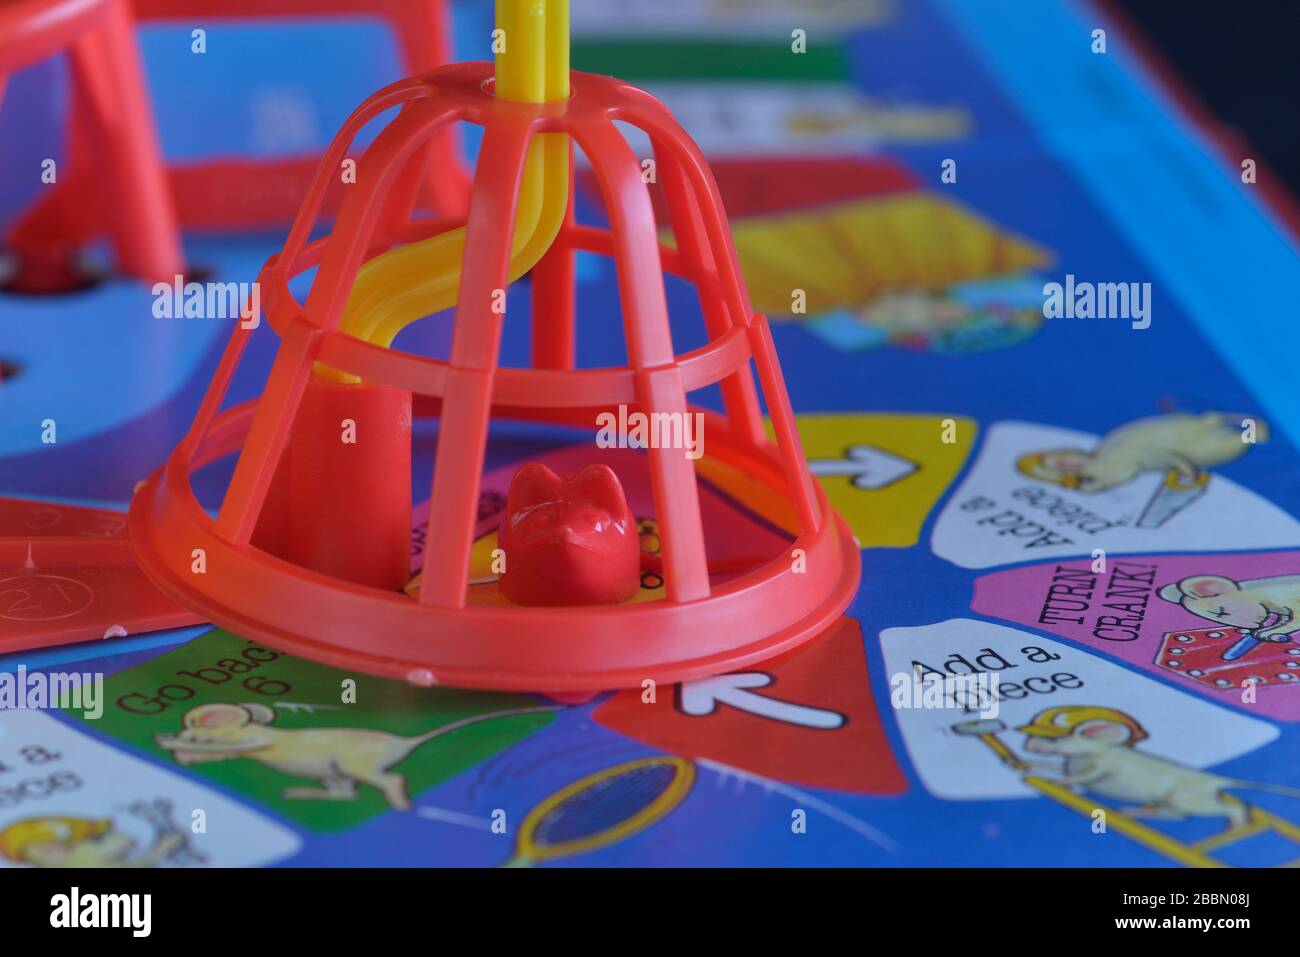 https://c8.alamy.com/comp/2BBN08J/captured-and-caged-plastic-mouse-on-the-mouse-trap-mousetrap-board-game-2BBN08J.jpg